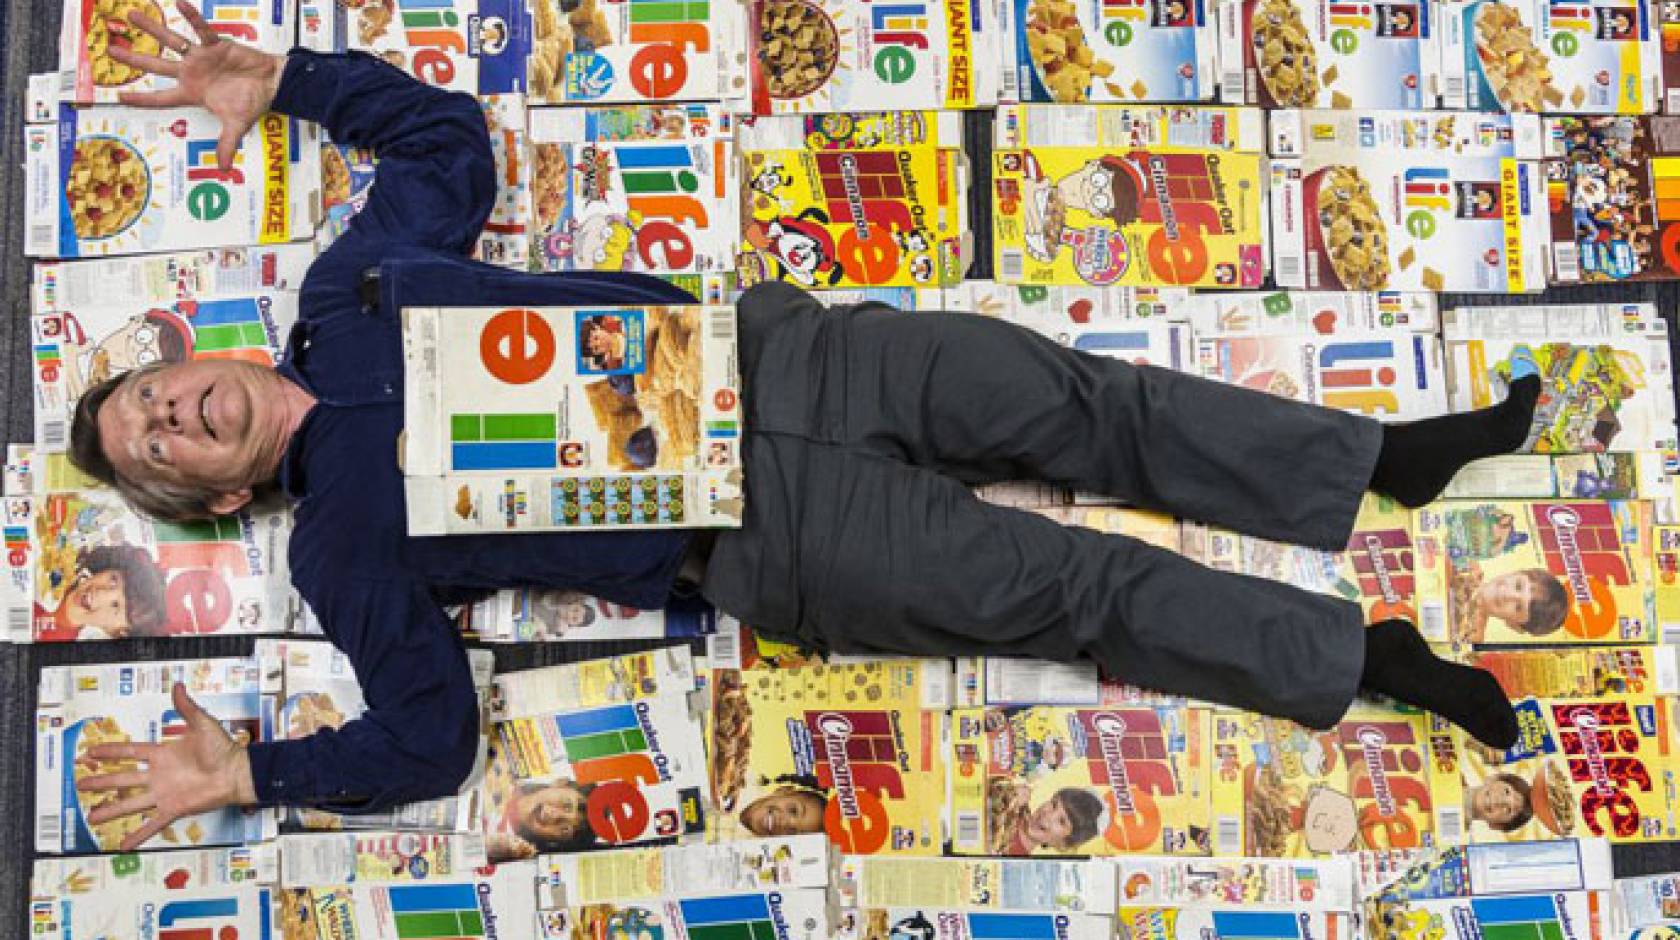 Professor lying on top of cereal boxes